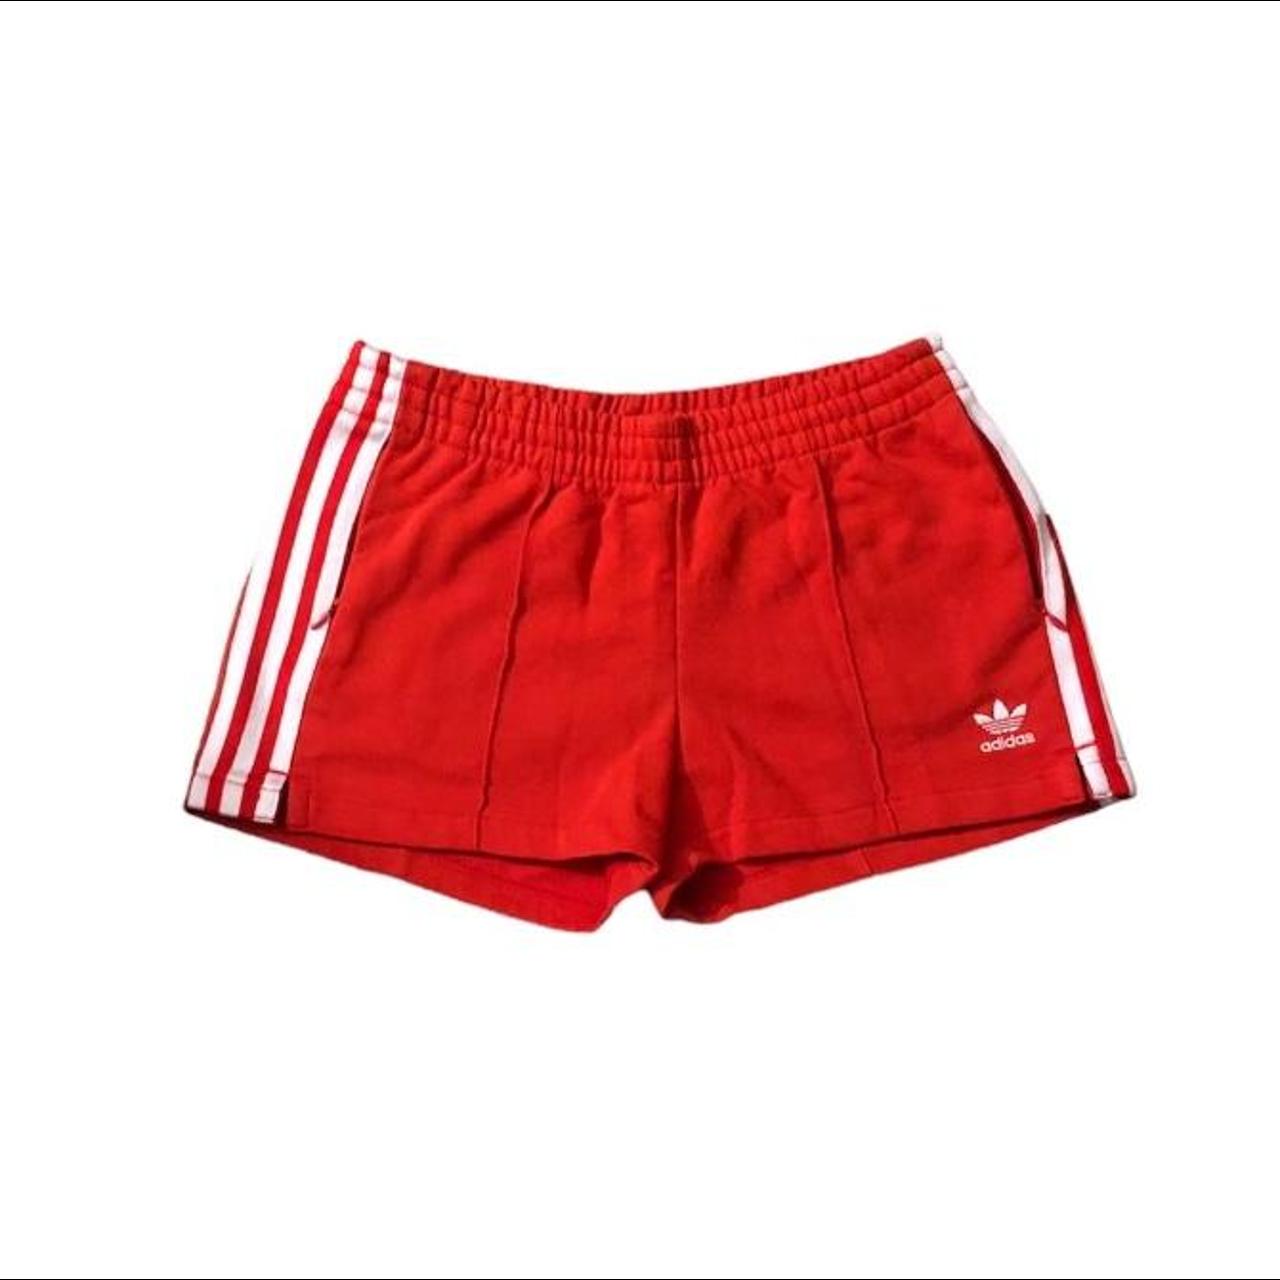 Adidas Women's Red and White Shorts